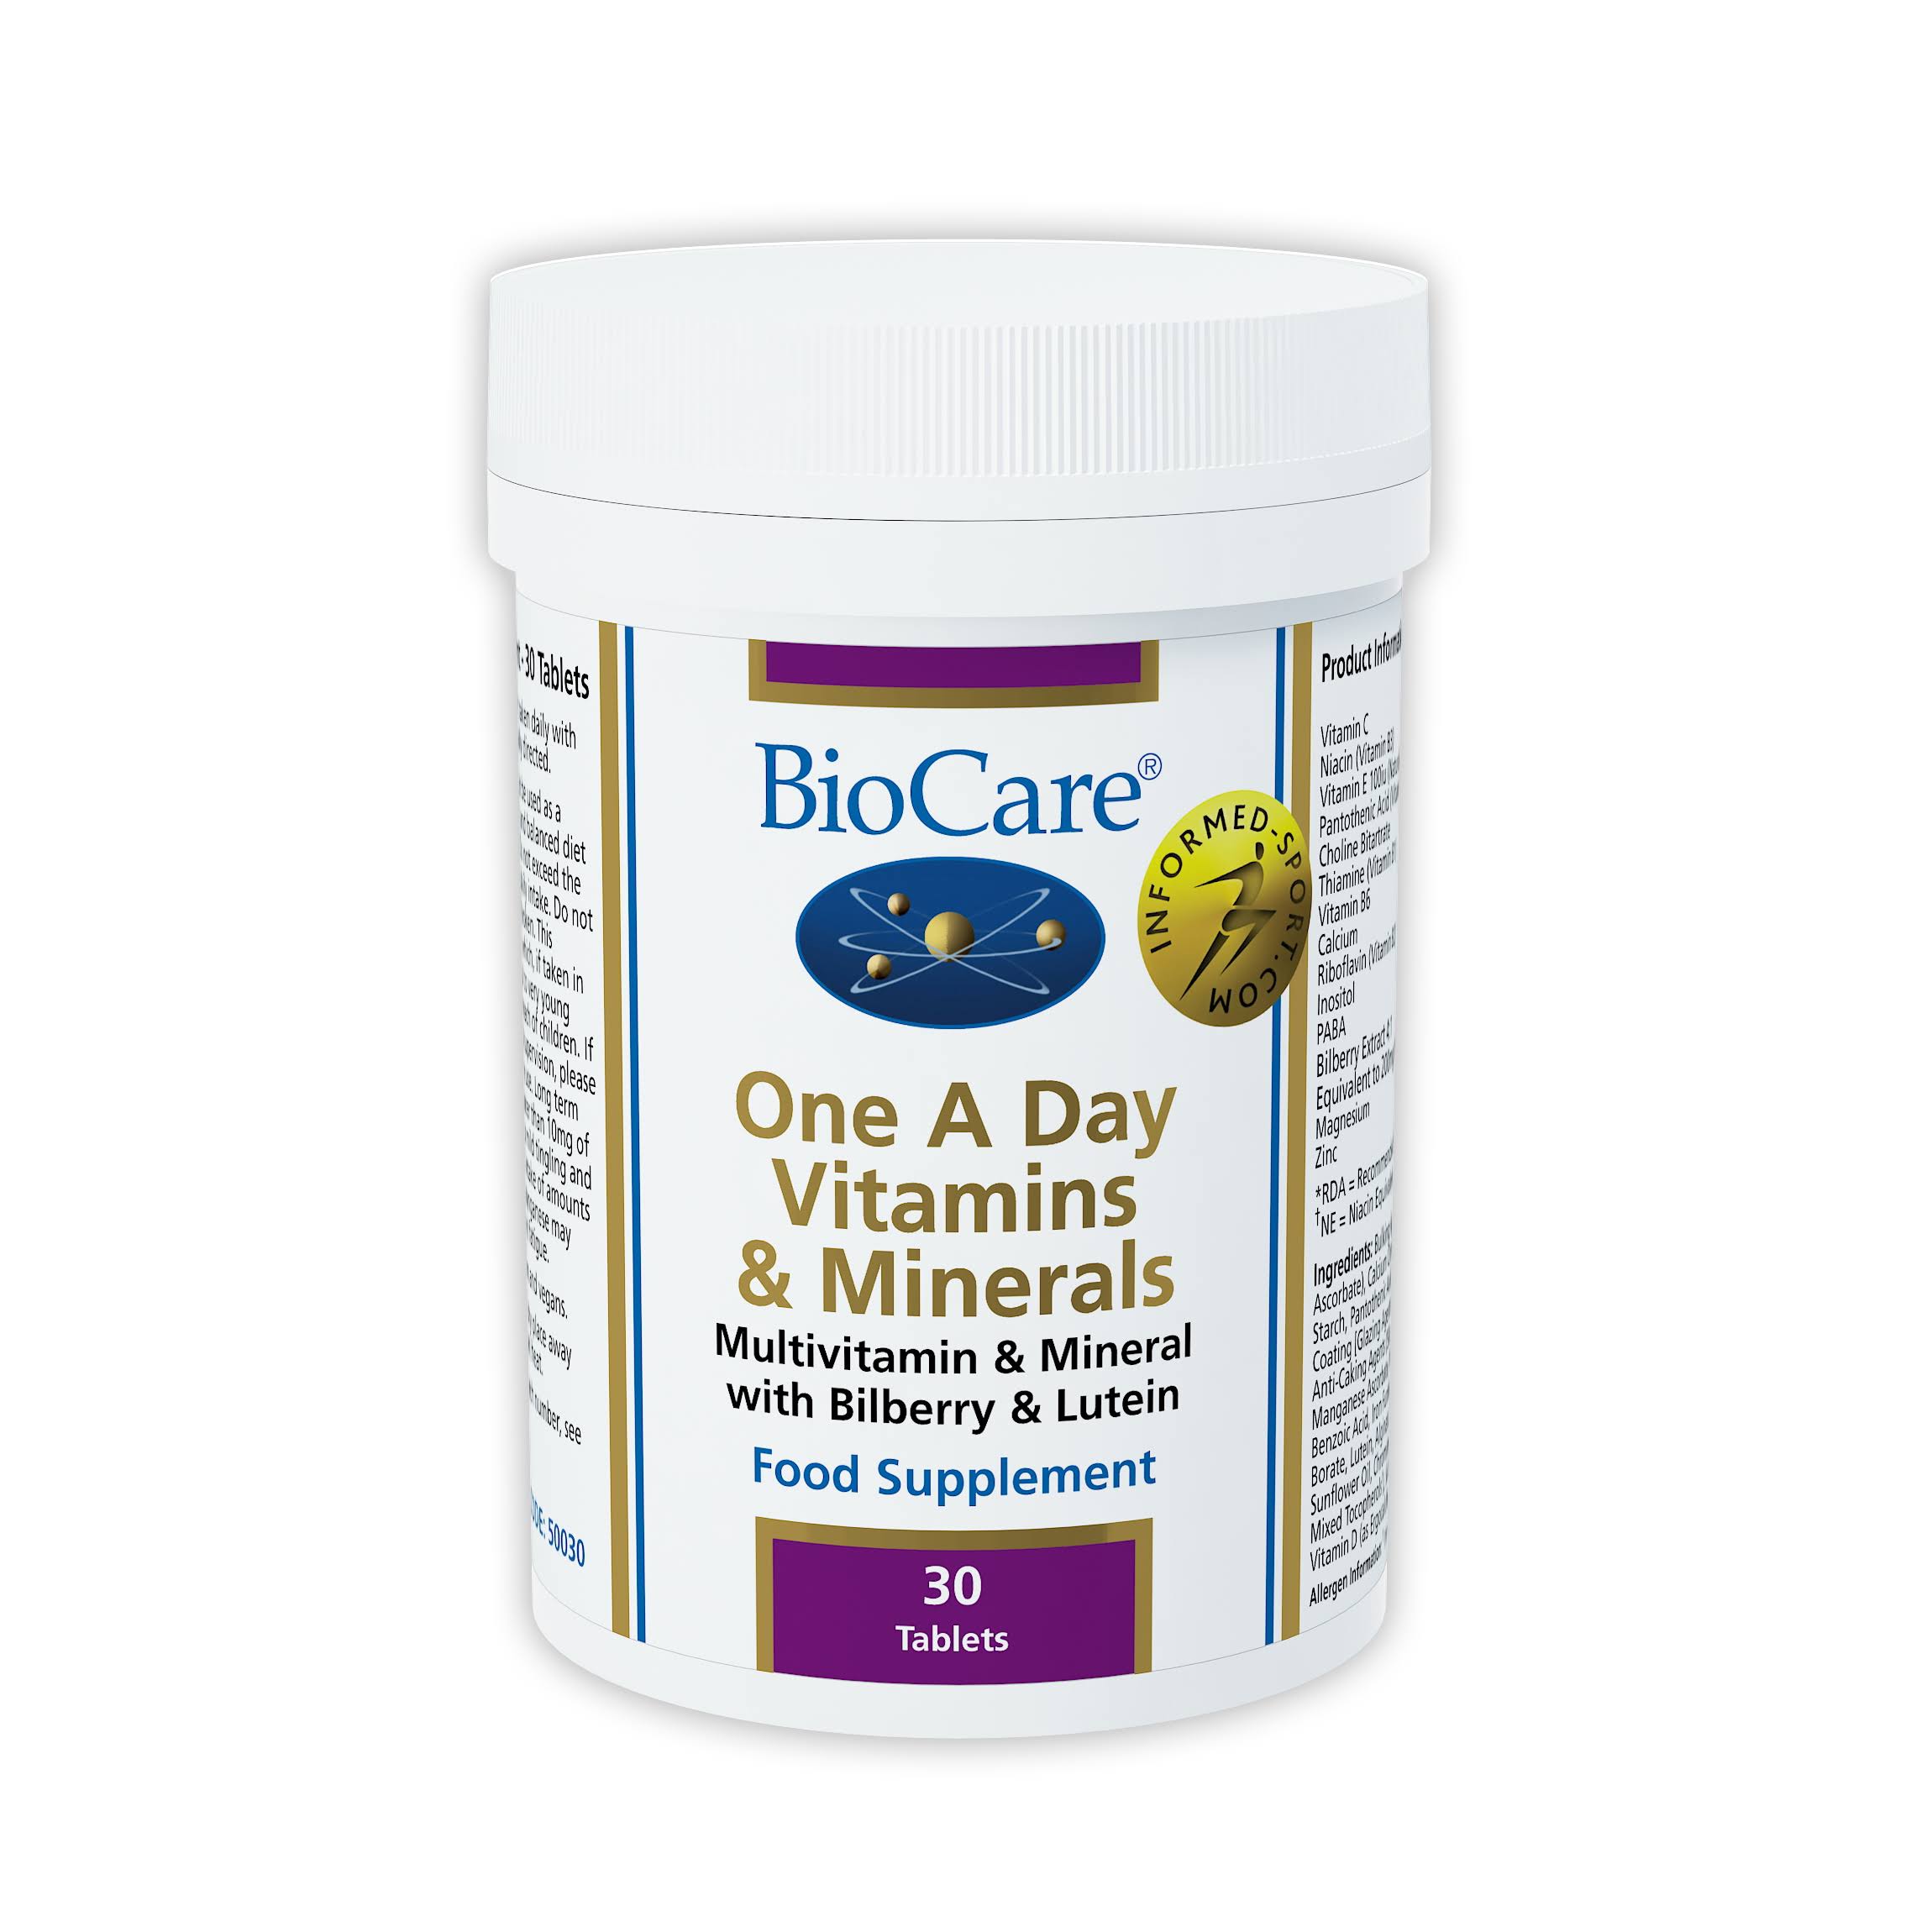 BioCare One a Day Vitamins and Minerals - 30 Tablets